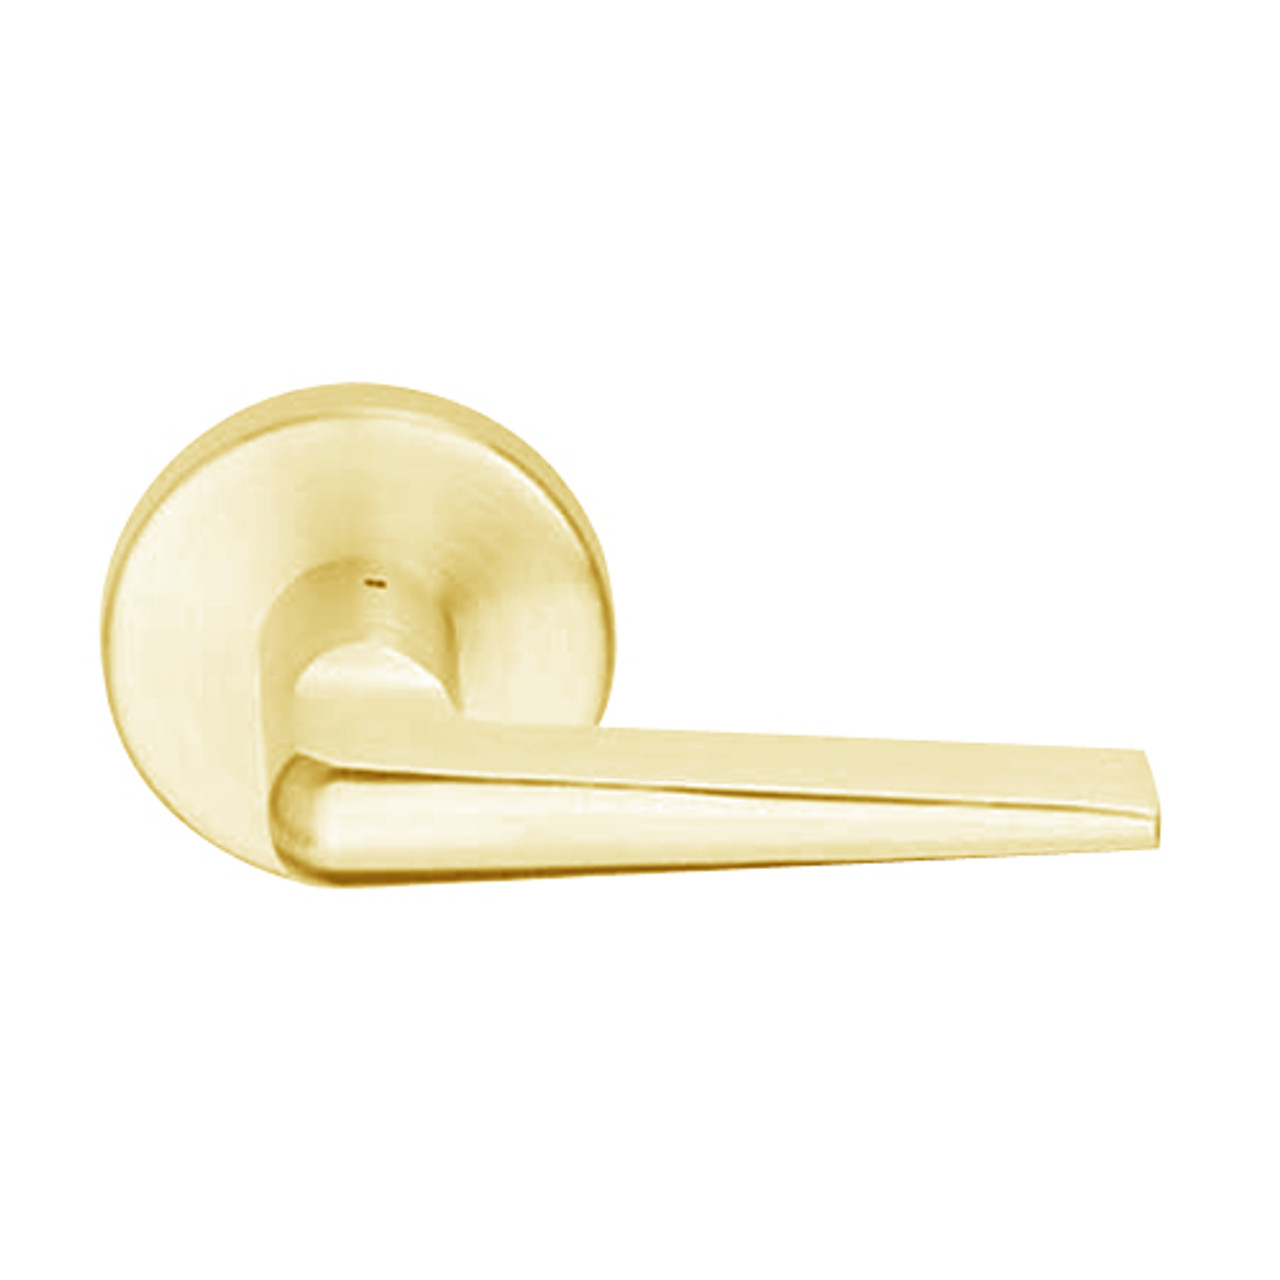 L9082P-05B-605 Schlage L Series Institution Commercial Mortise Lock with 05 Cast Lever Design in Bright Brass